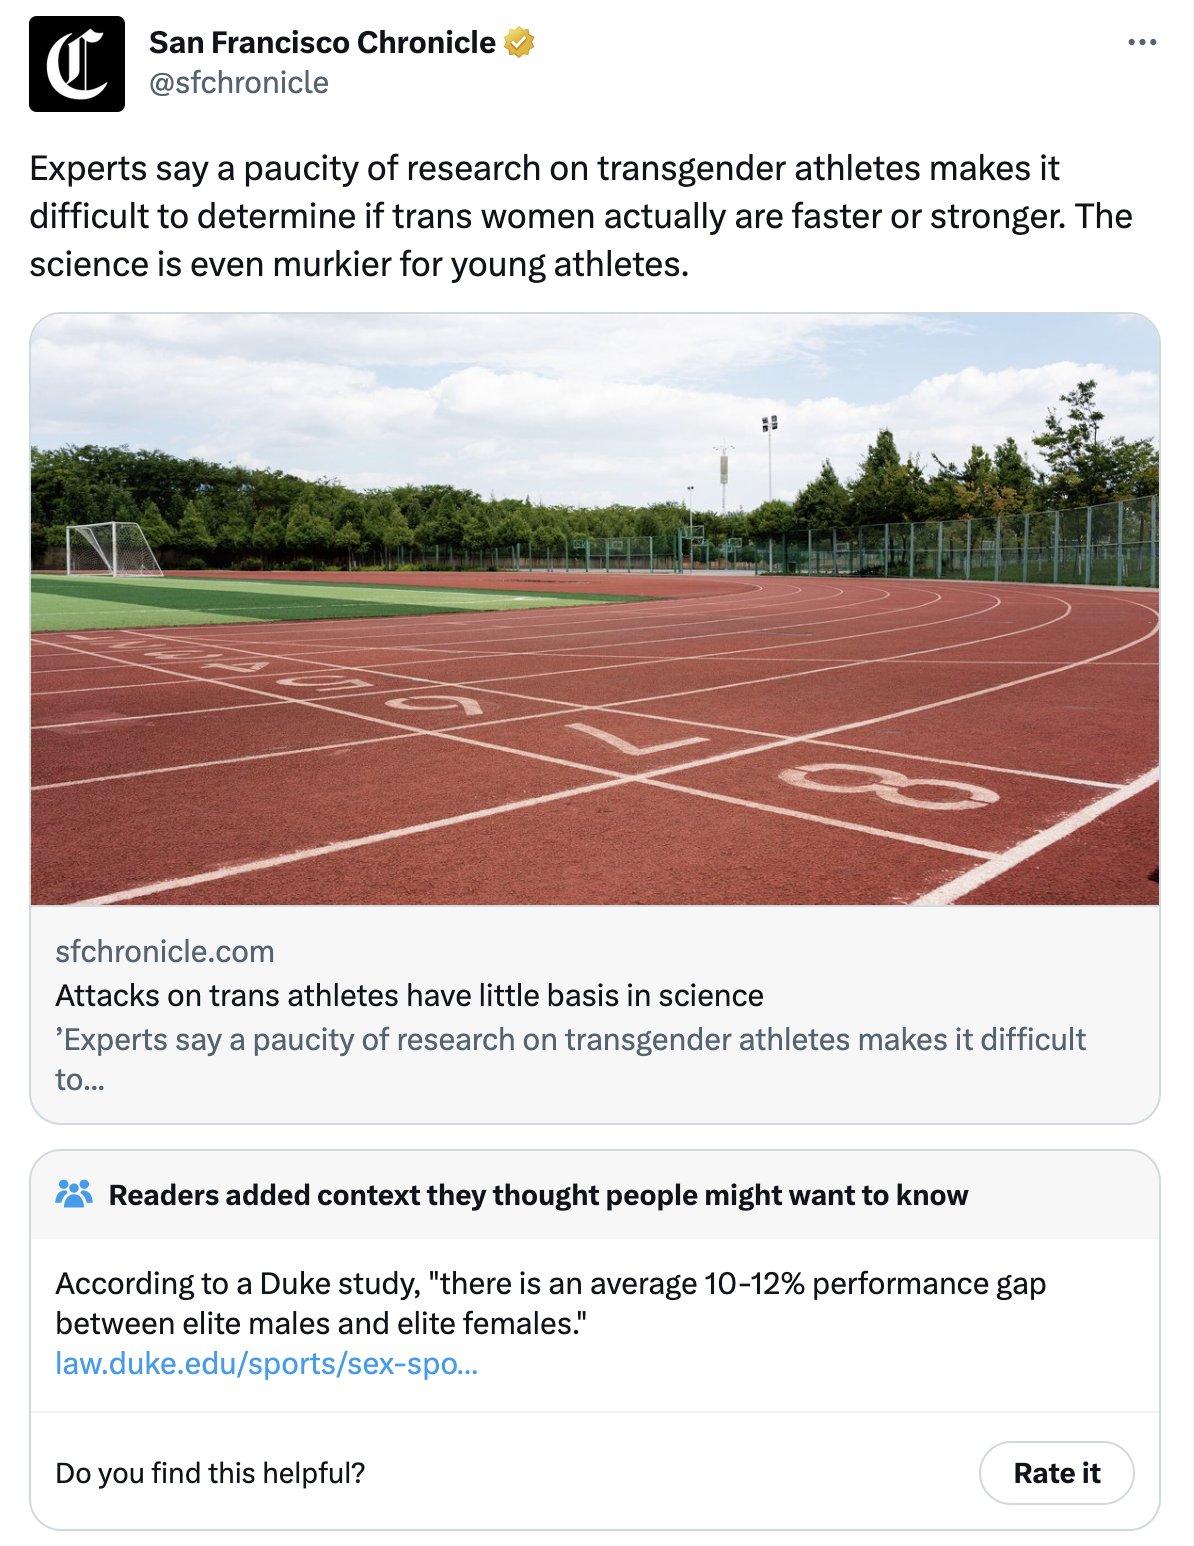 funny community notes - brochure - C Experts say a paucity of research on transgender athletes makes it difficult to determine if trans women actually are faster or stronger. The science is even murkier for young athletes. San Francisco Chronicle F # 2 sf